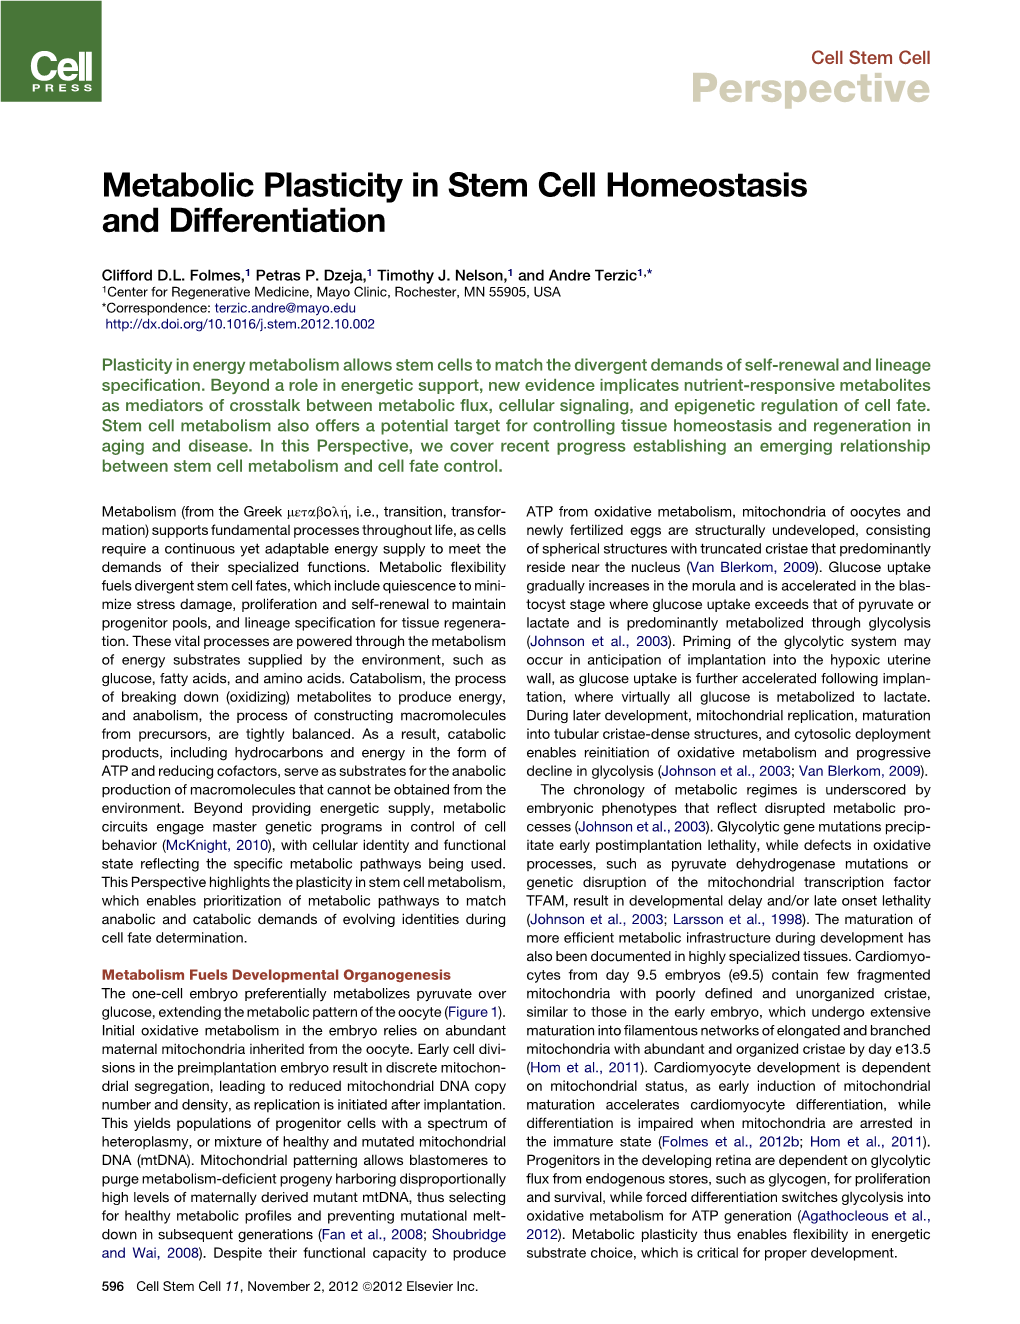 Metabolic Plasticity in Stem Cell Homeostasis and Differentiation